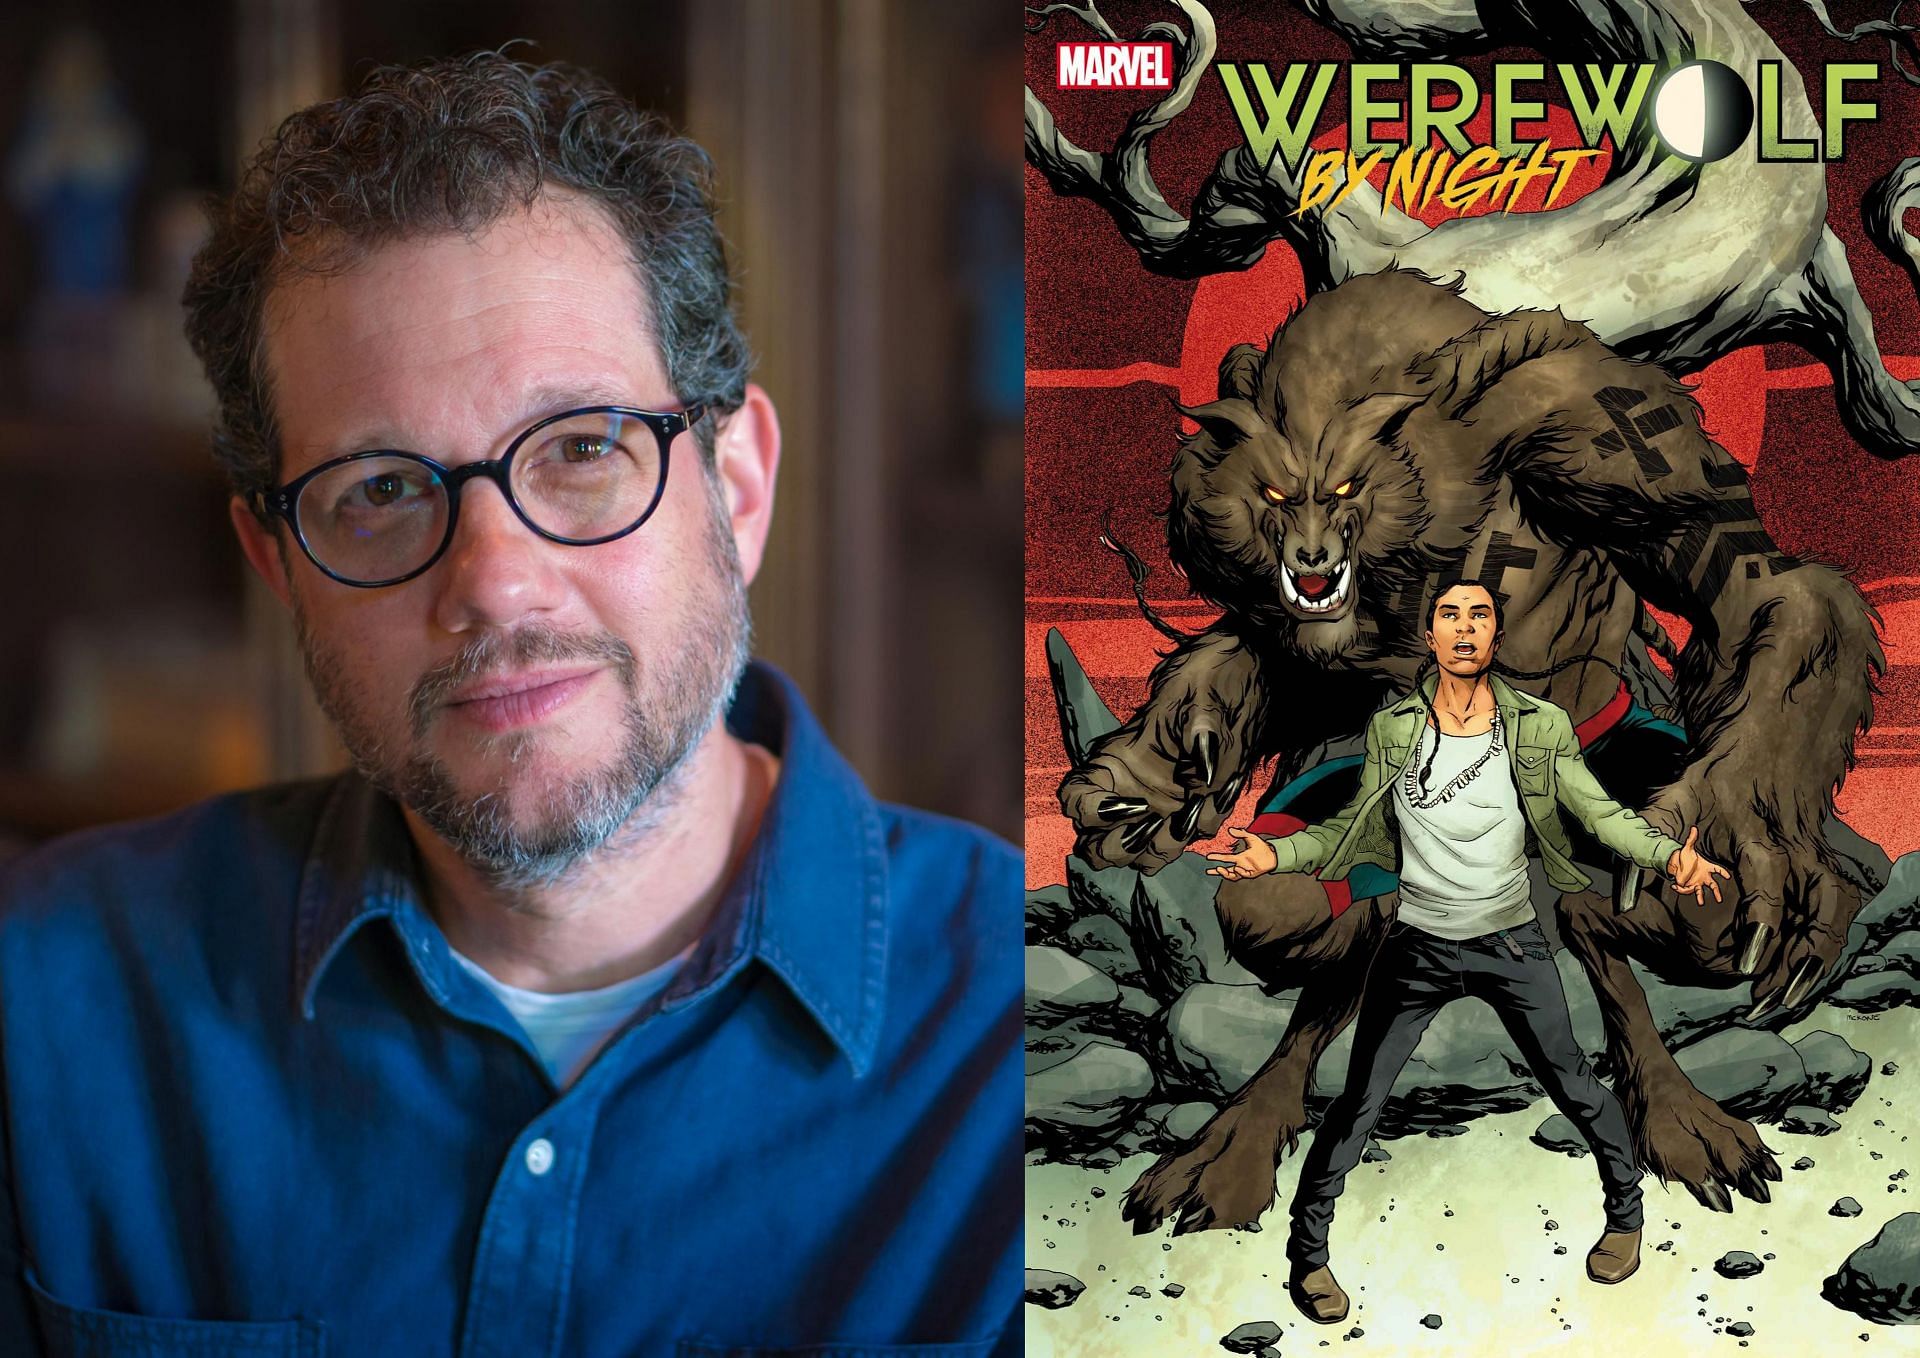 Werewolf By Night Reportedly Appearing in Future Marvel Studios Project